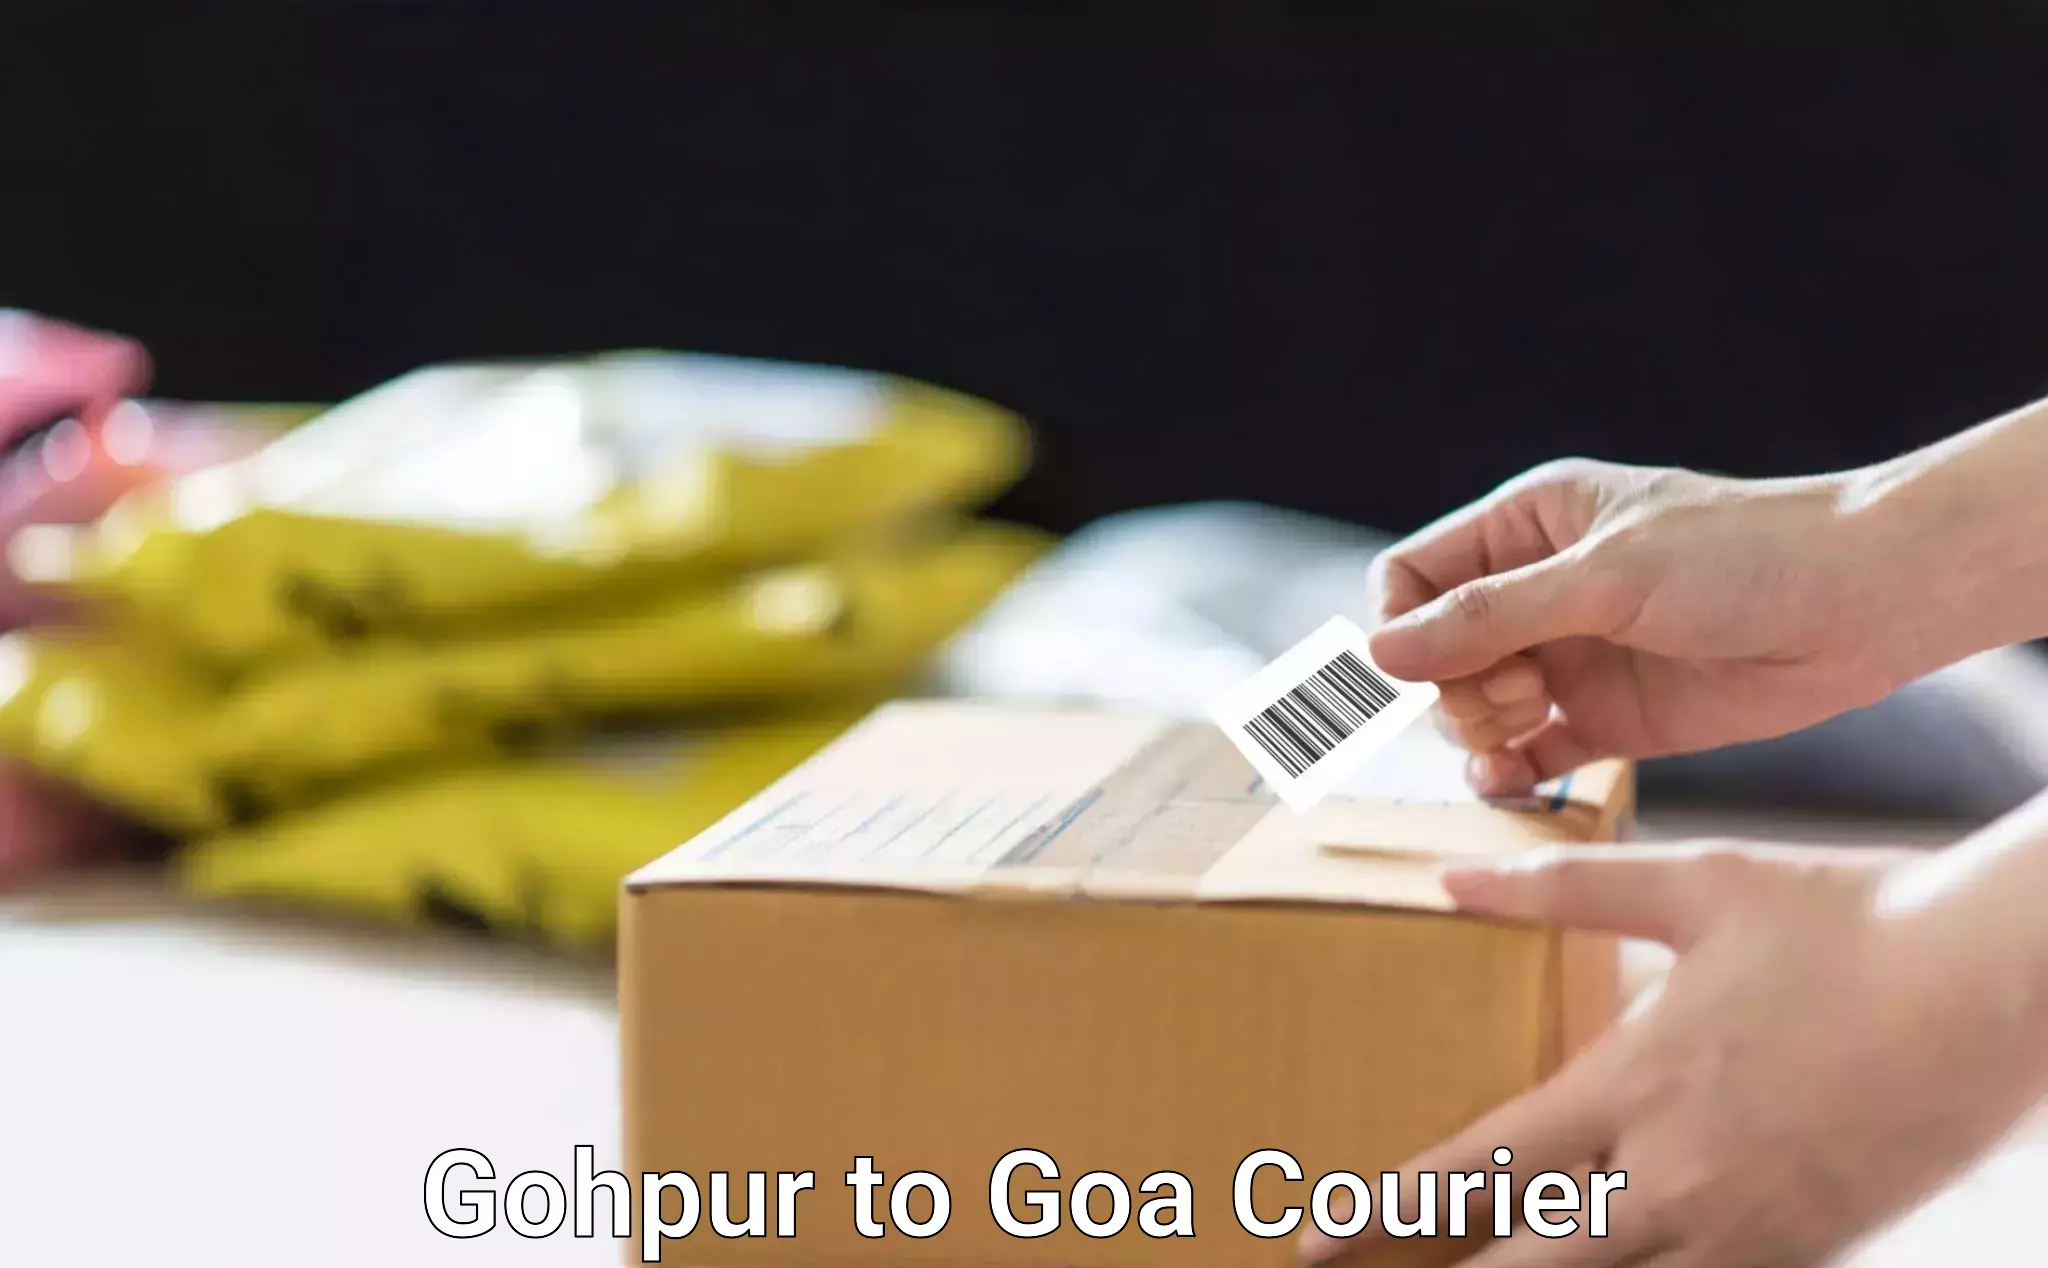 Parcel handling and care Gohpur to Panaji